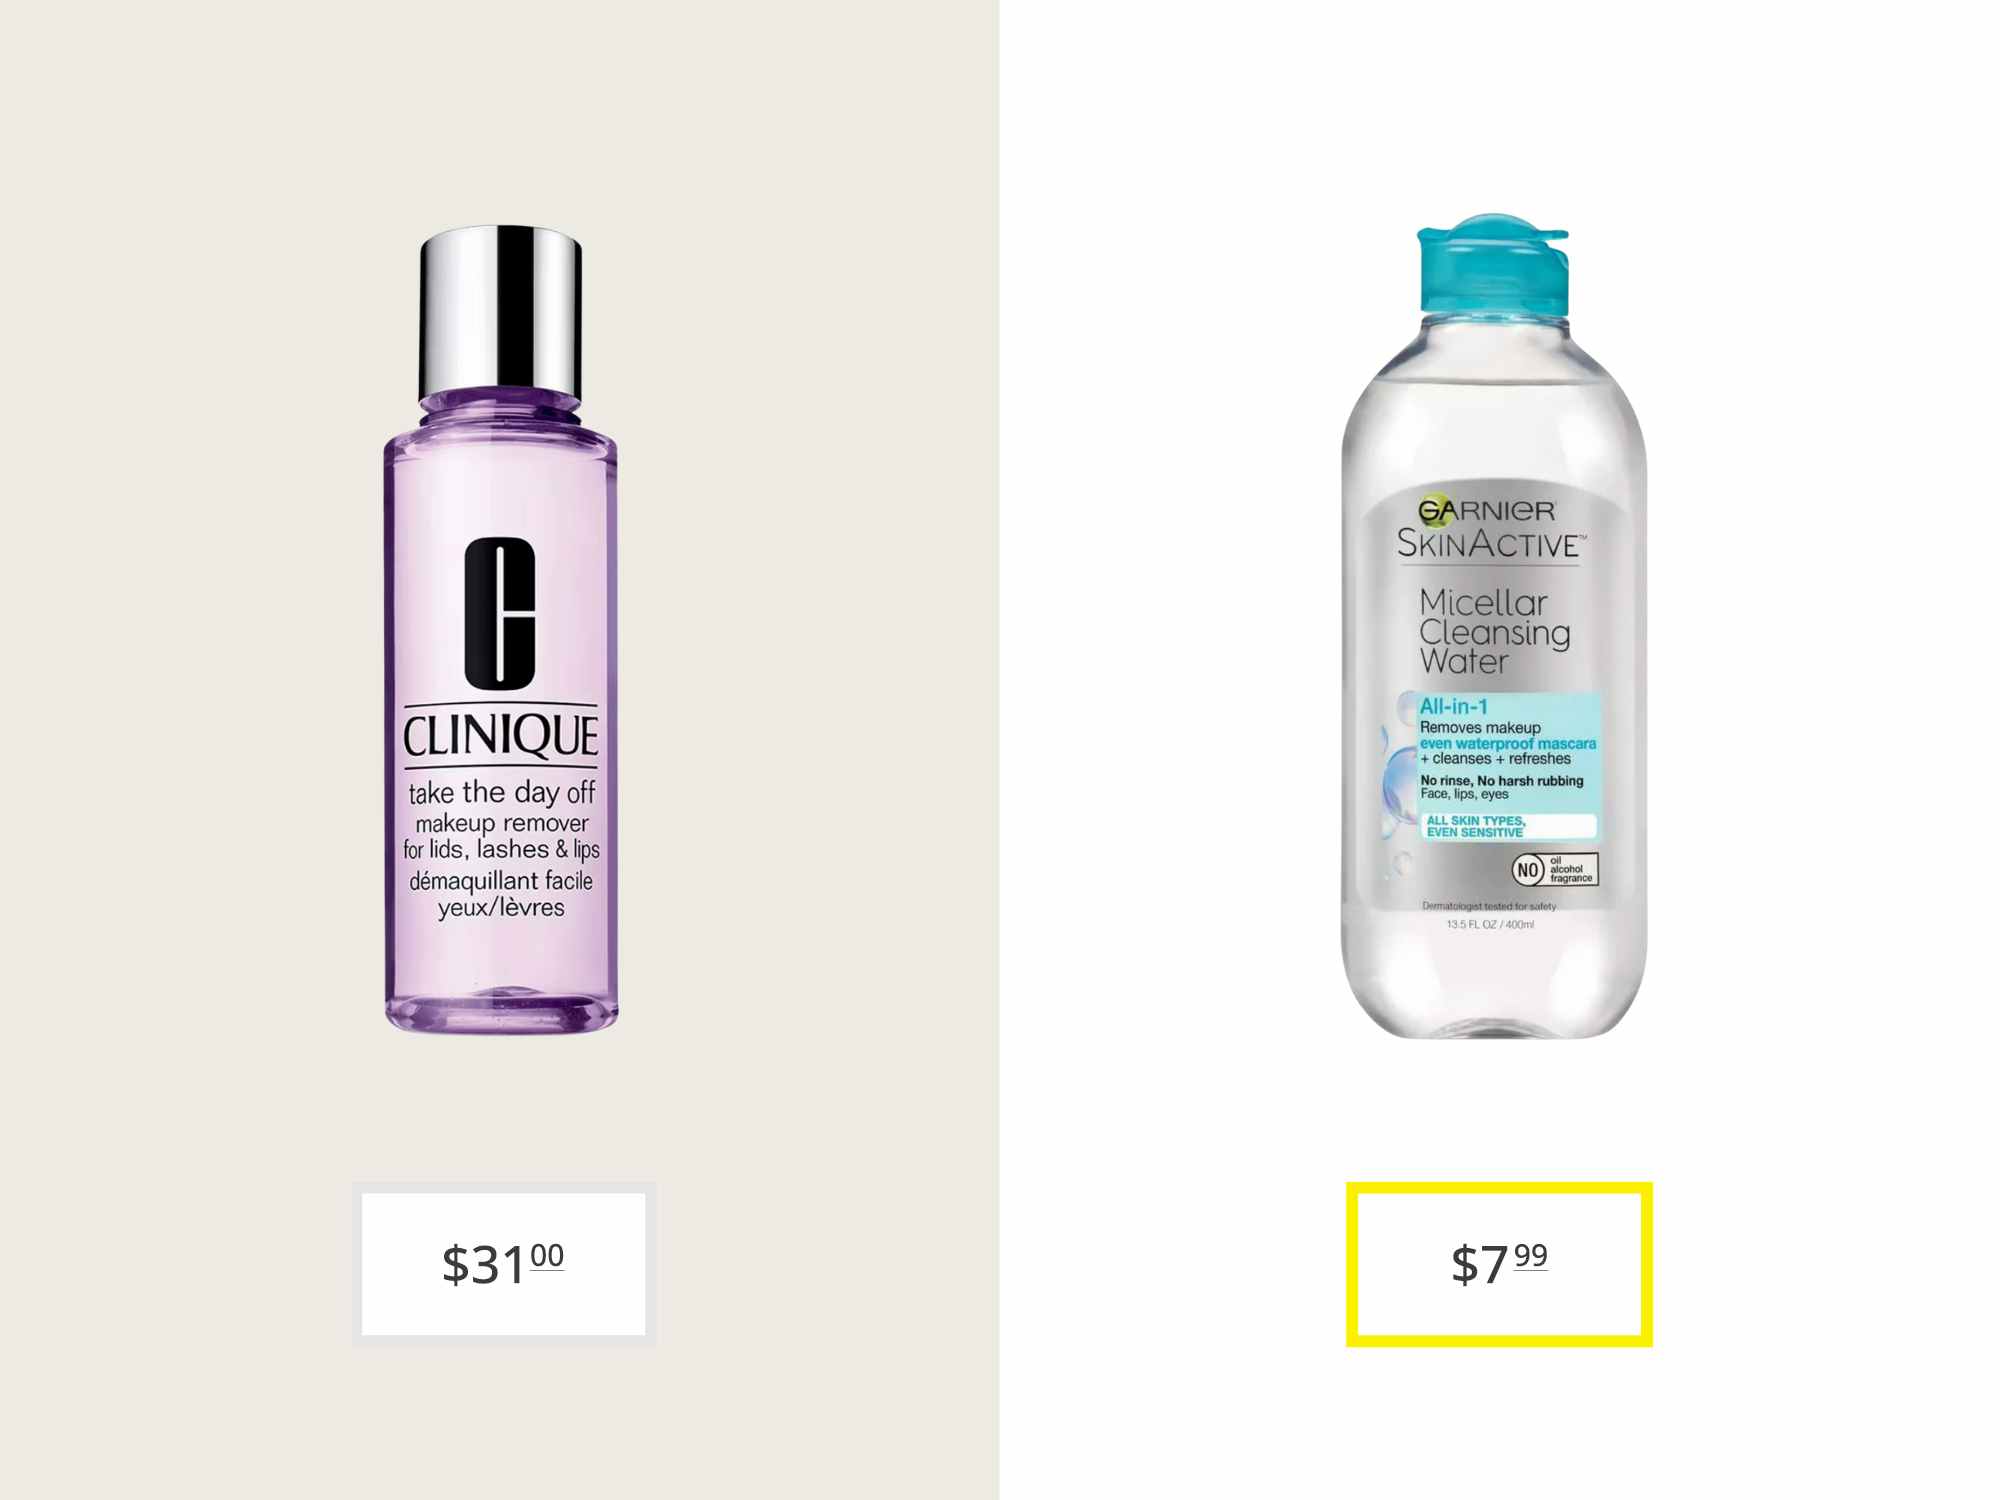 clinique take the day off makeup remover and garnier skinactive micellar cleansing water price comparison graphic